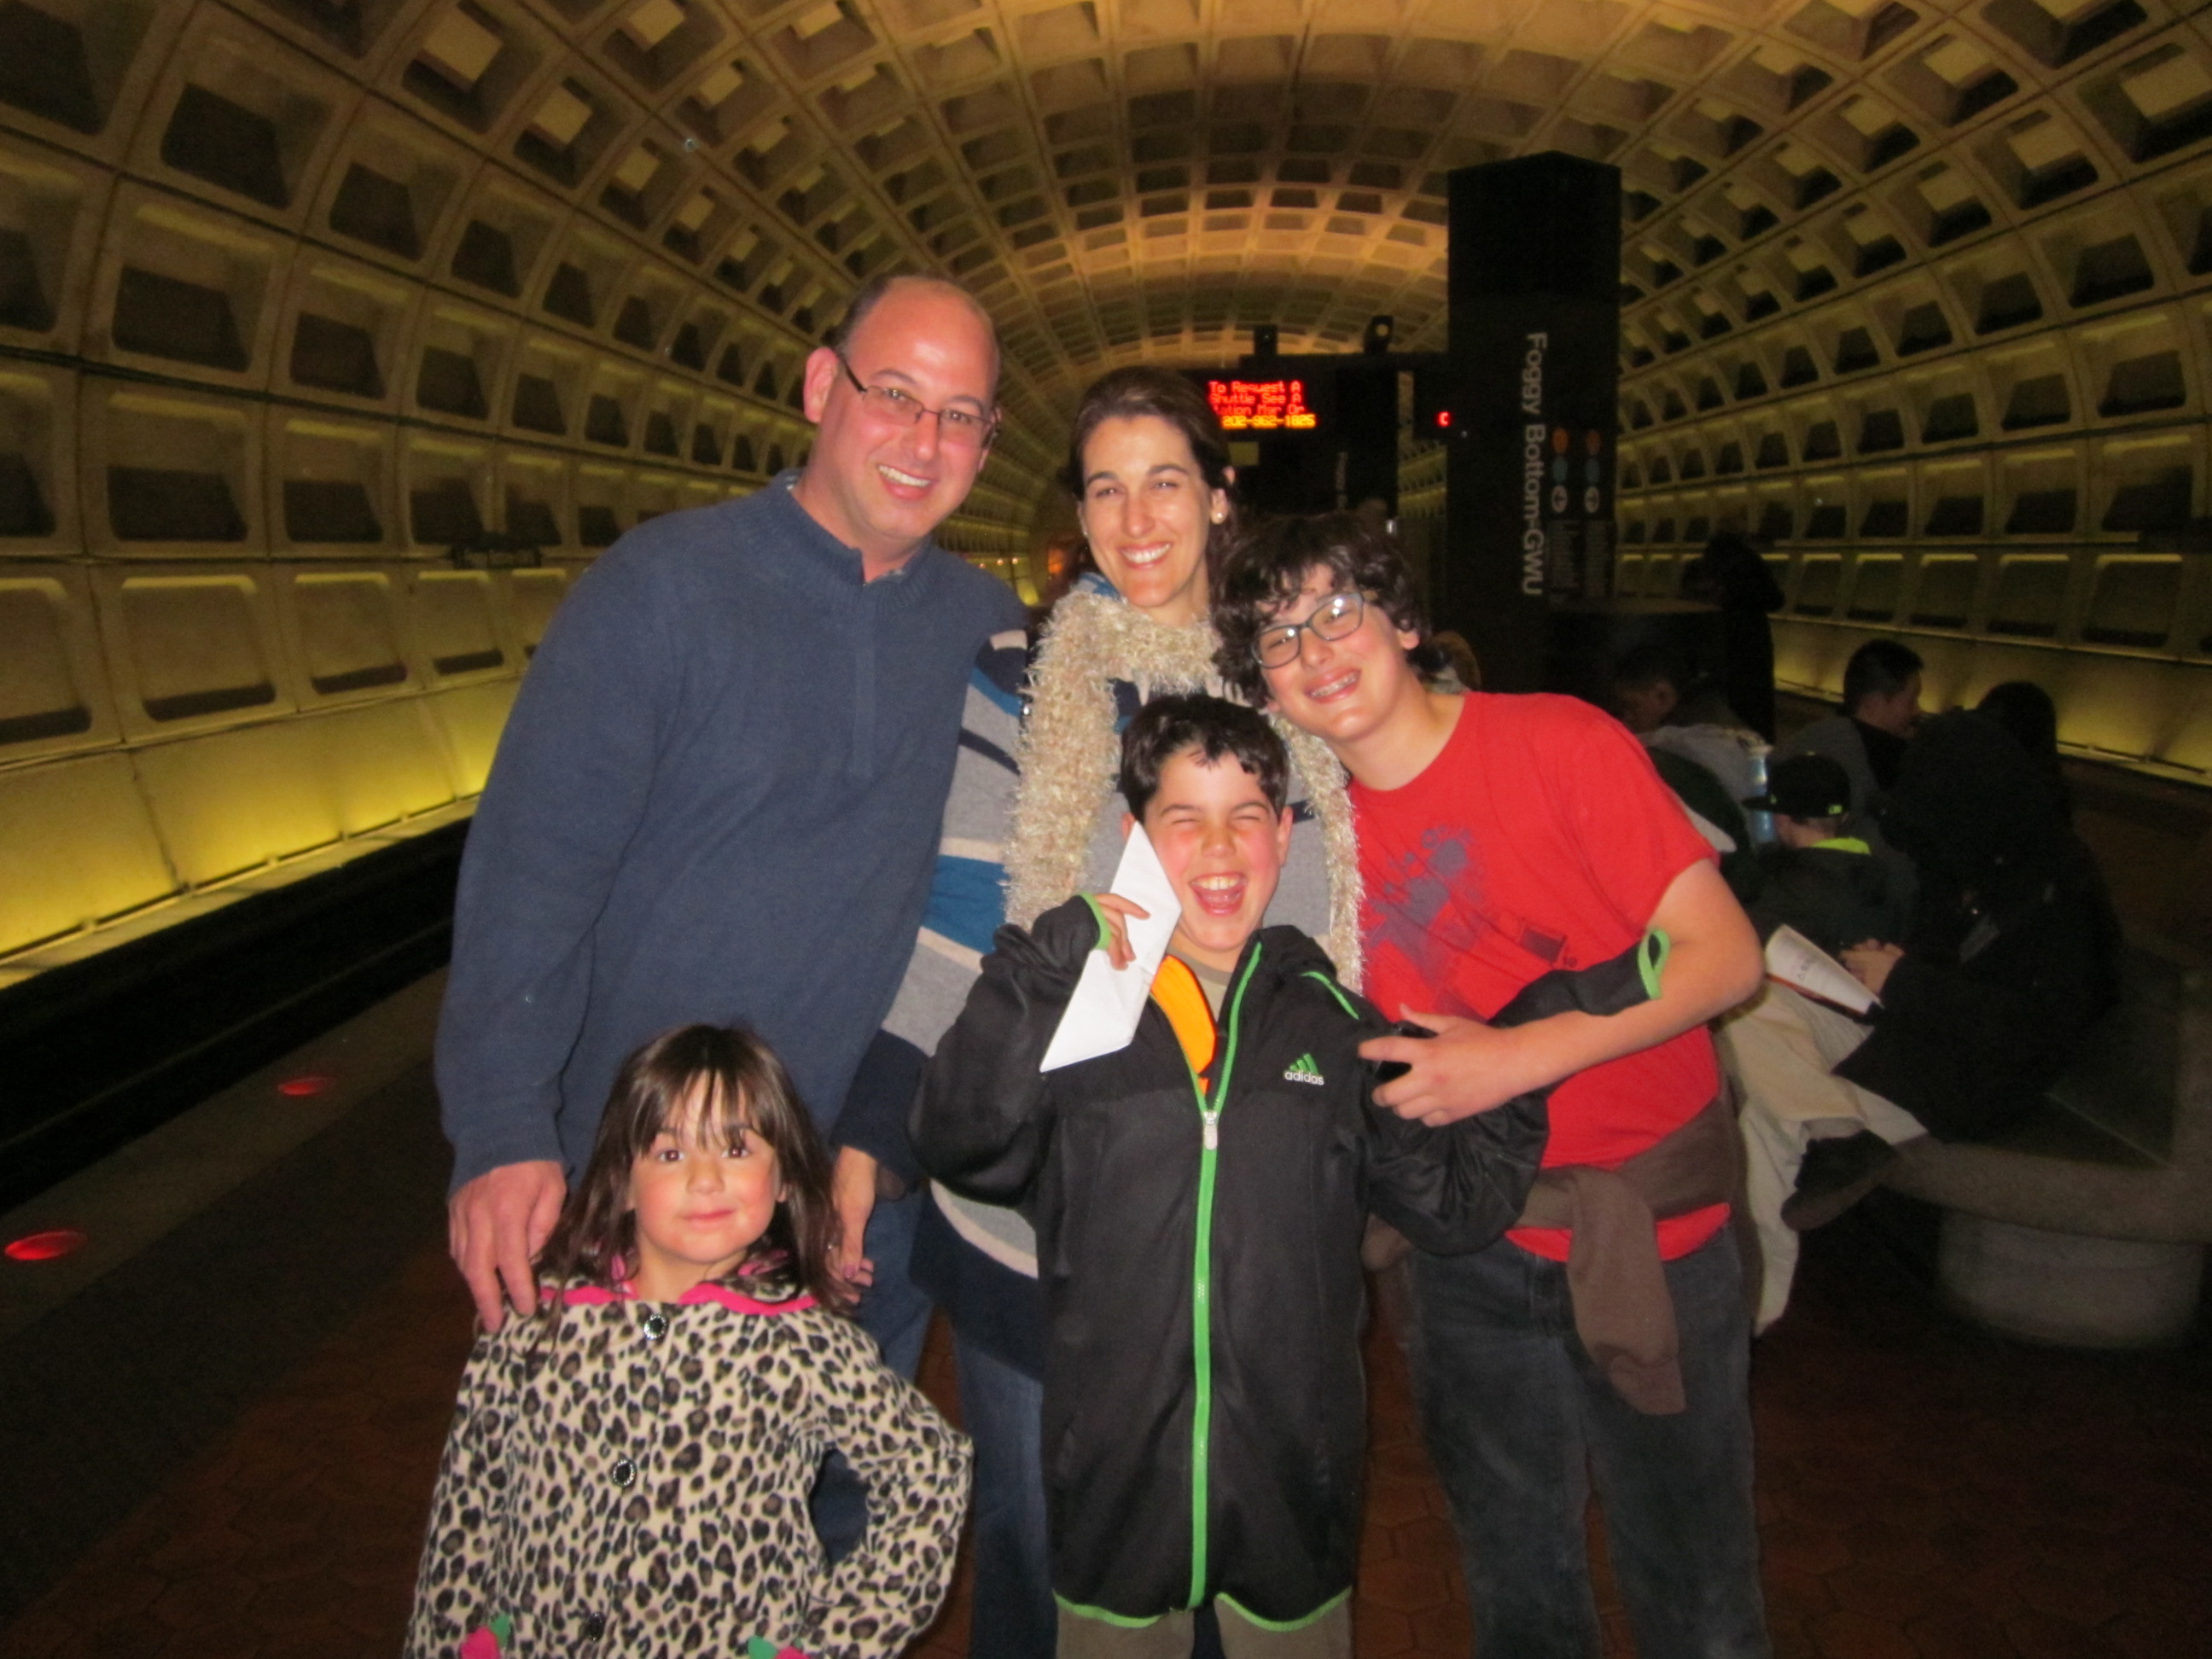 Family pictured at Jacob's Bar Mitzvah - Oct 2012